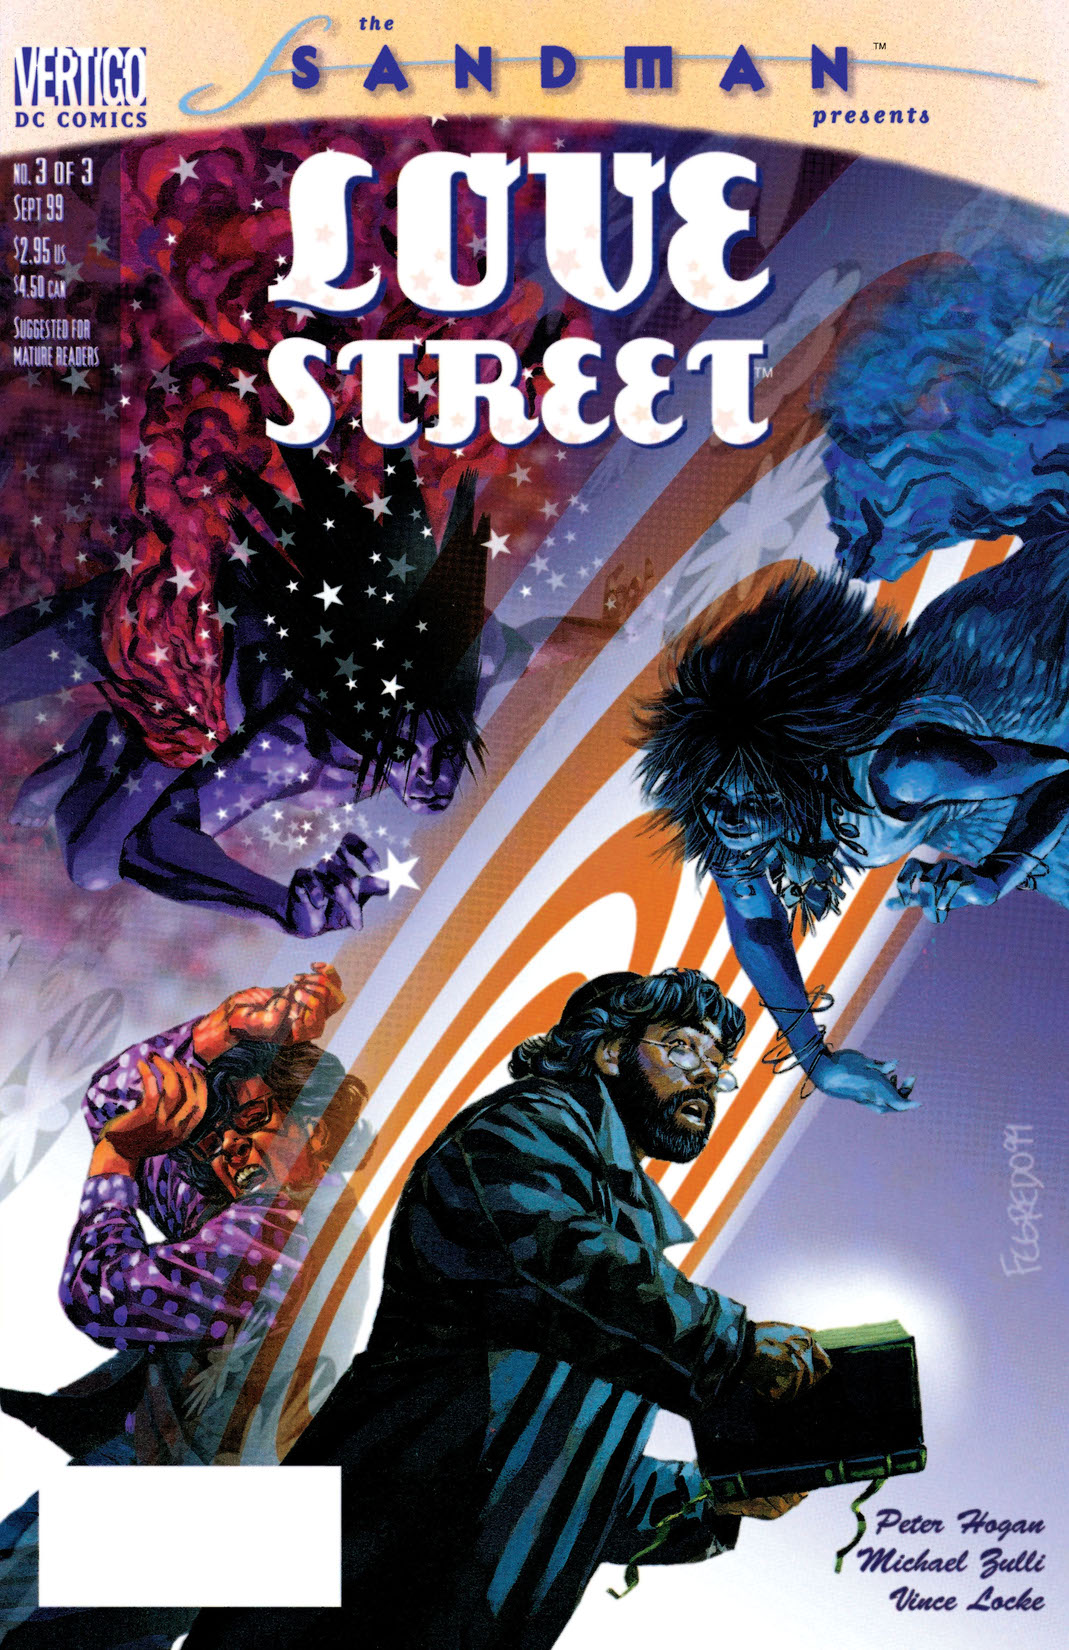 The Sandman Presents: Love Street #3 preview images